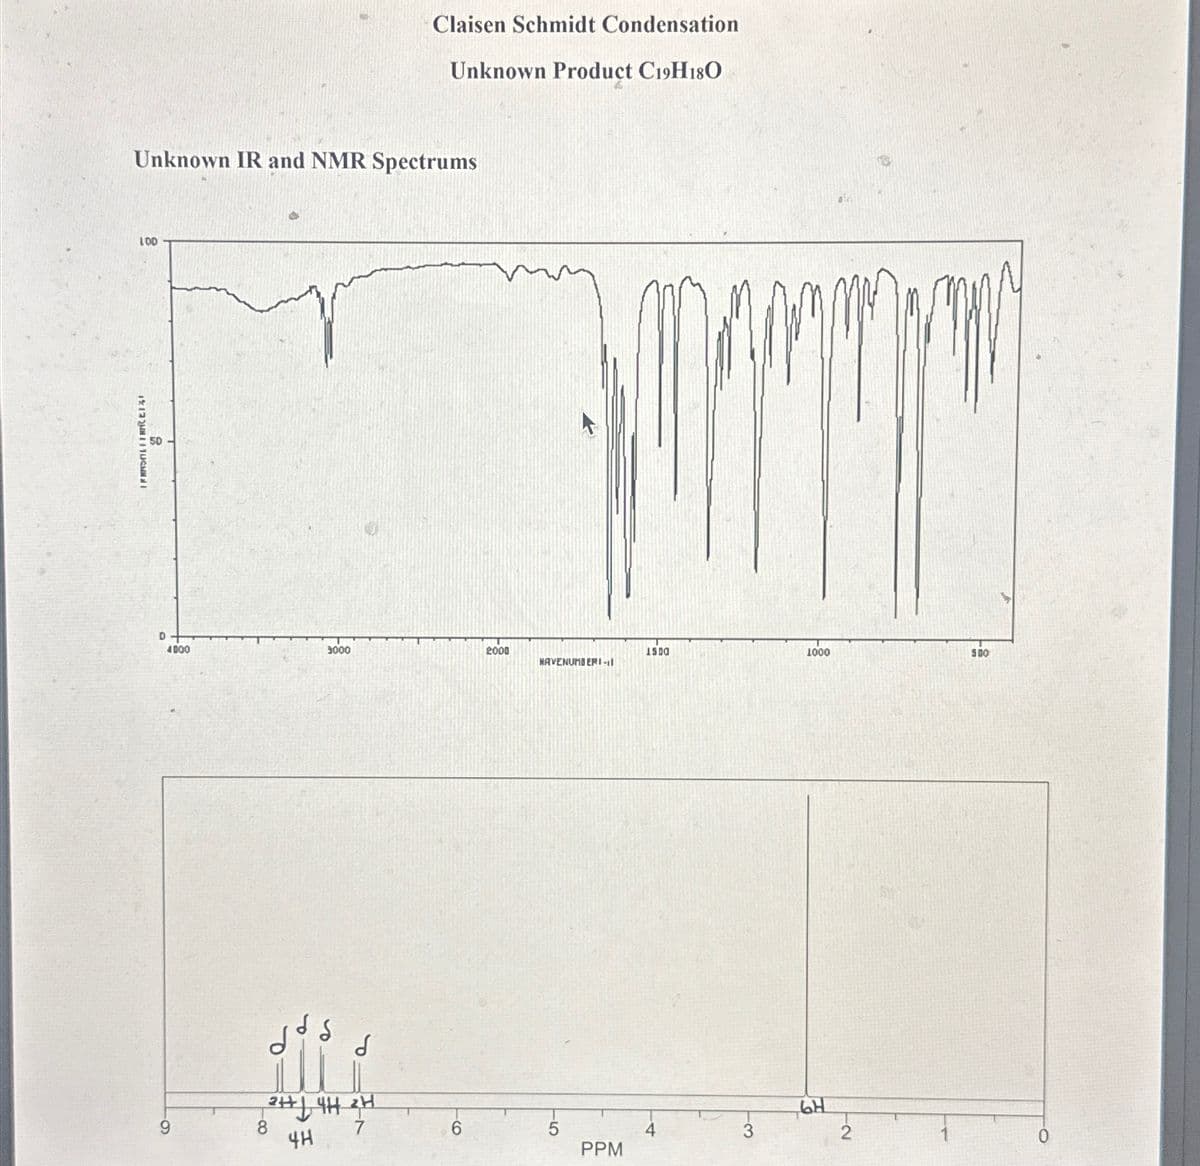 Claisen Schmidt Condensation
Unknown Product C19H180
Unknown IR and NMR Spectrums
100
50
D
4000
3000
2000
1500
1000
500
NAVENUMBERI-il
9
8
م
HJ4H2H
4H
6
5
PPM
4
13
6H
-2